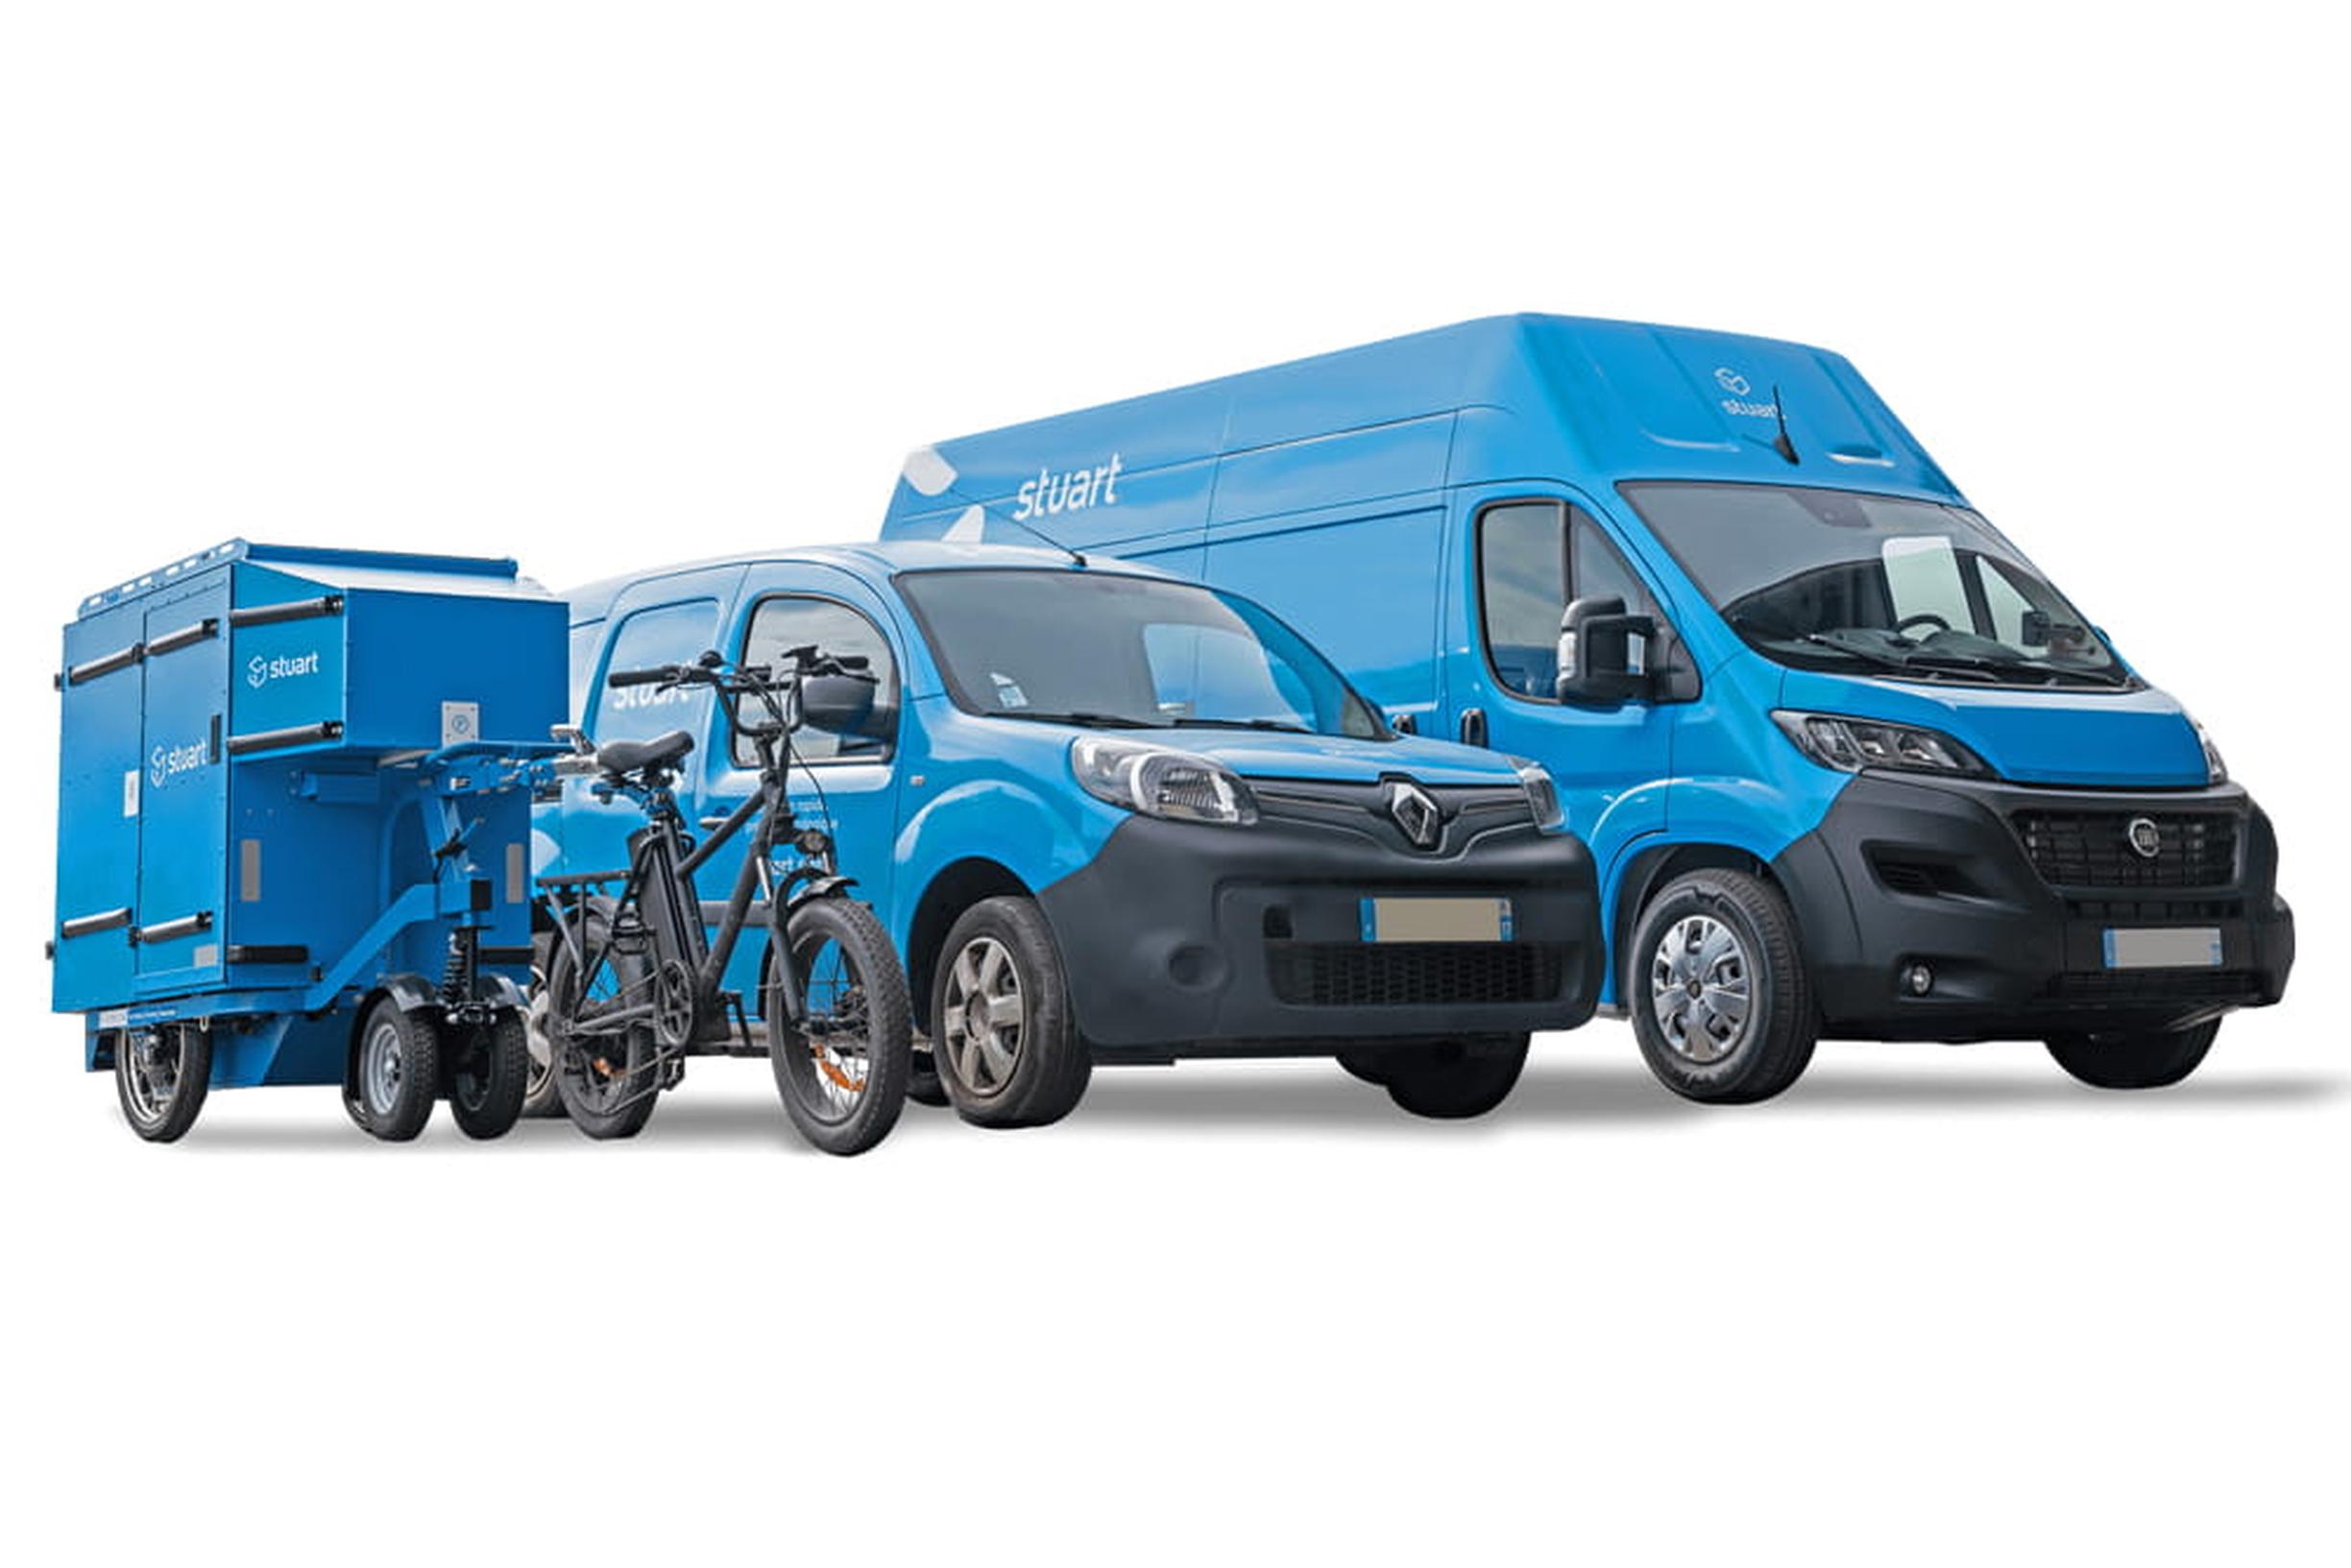 Stuart provides last mile delivery with a fleet of bikes and vans